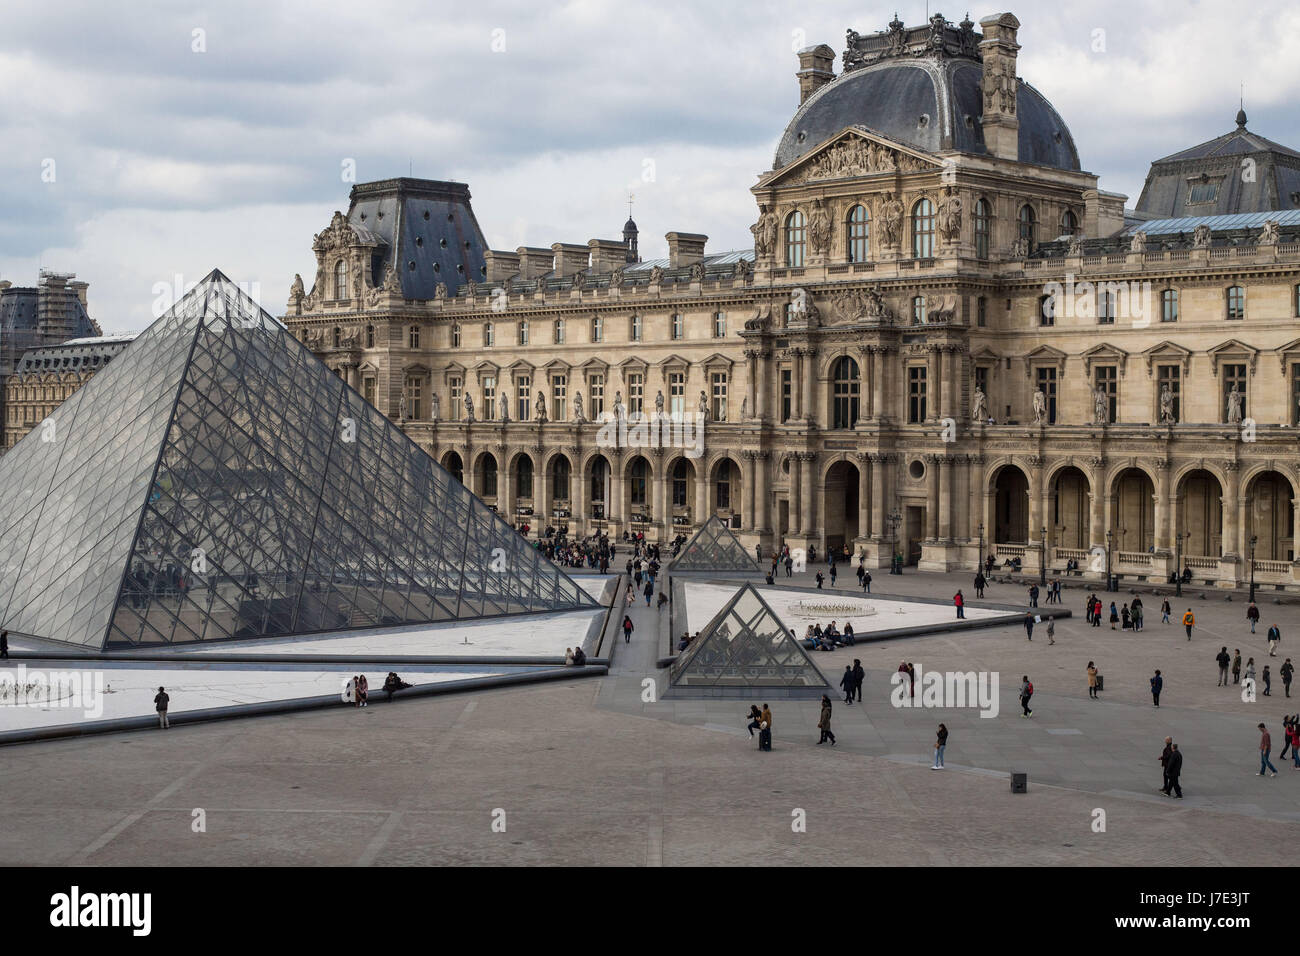 The Louvre Museum glass pyramid with building in background, Paris France Stock Photo